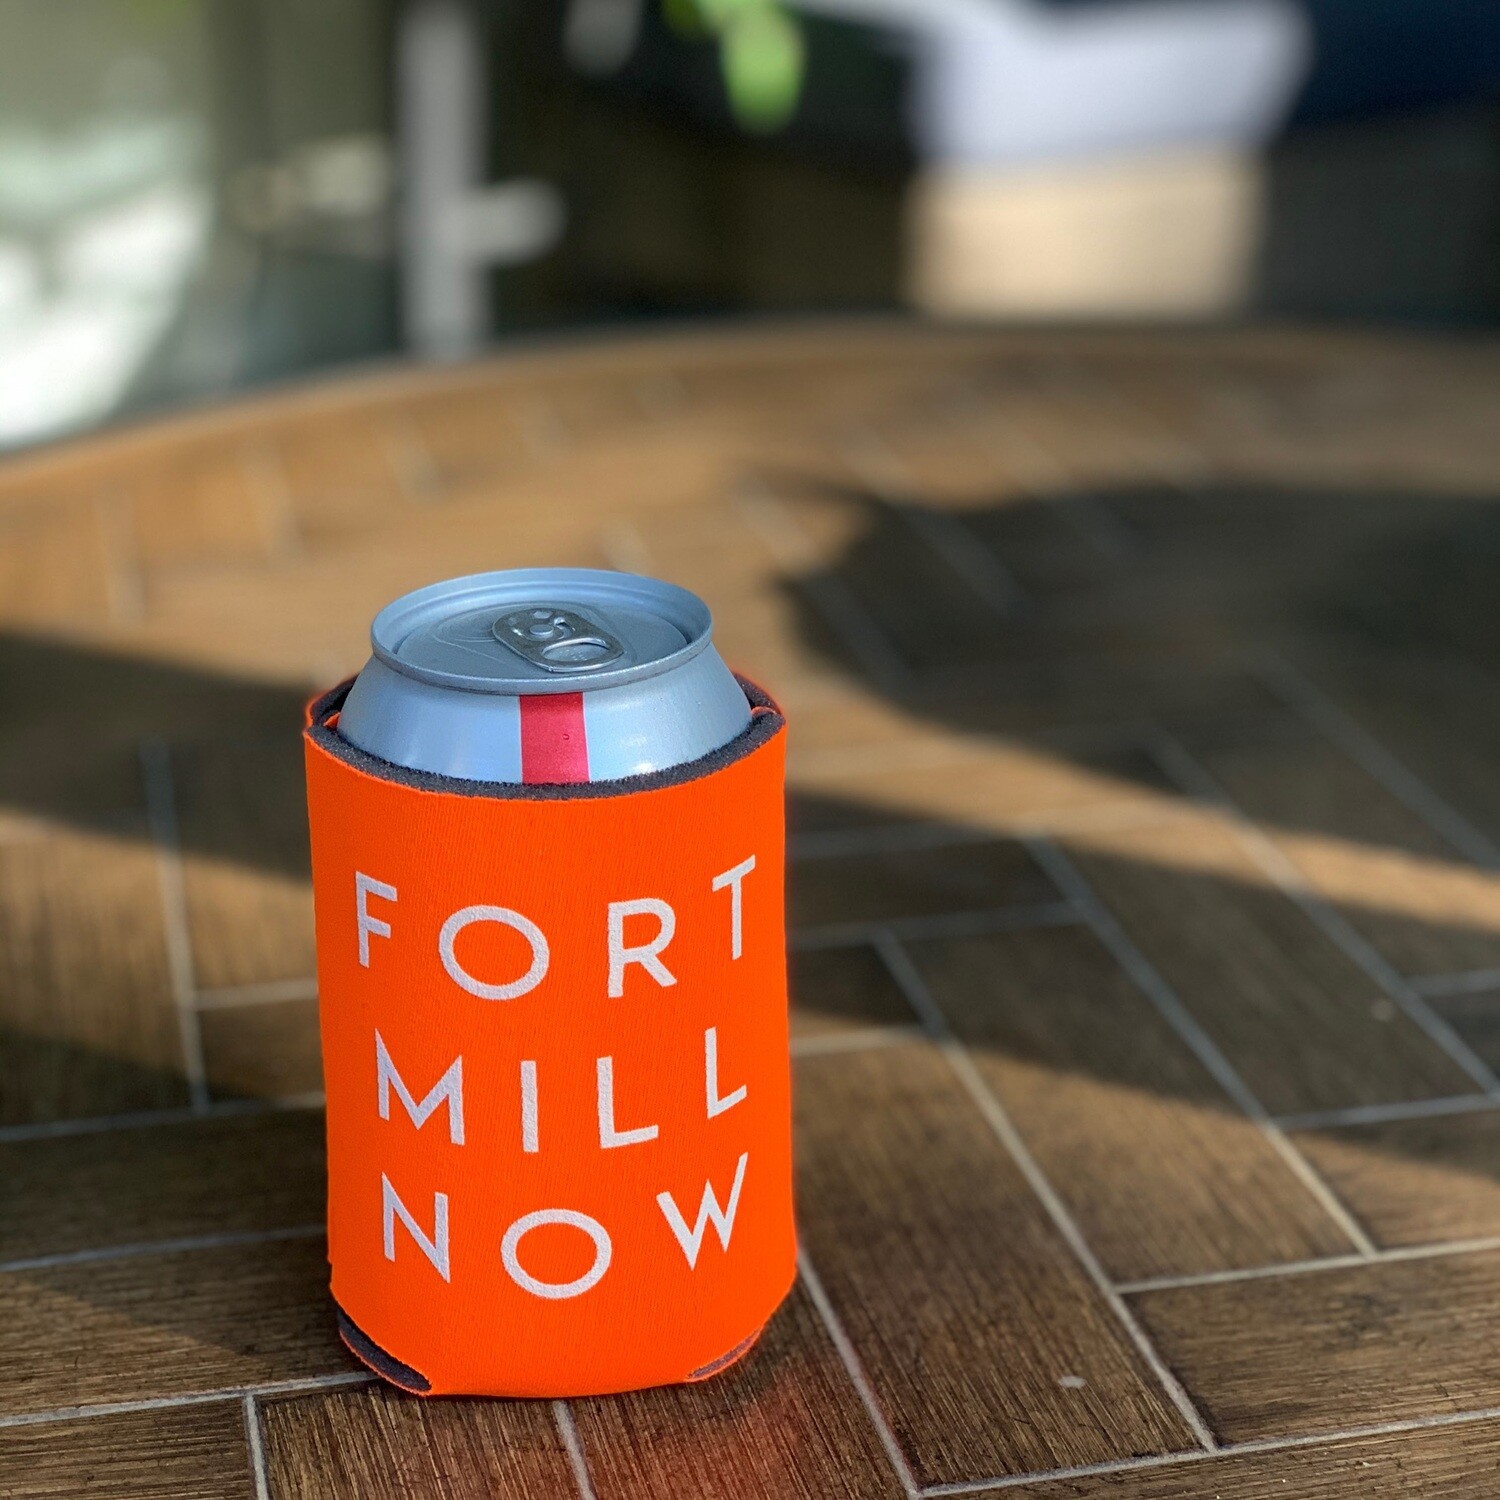 Fort Mill Now Koozie
(1 included in every order)